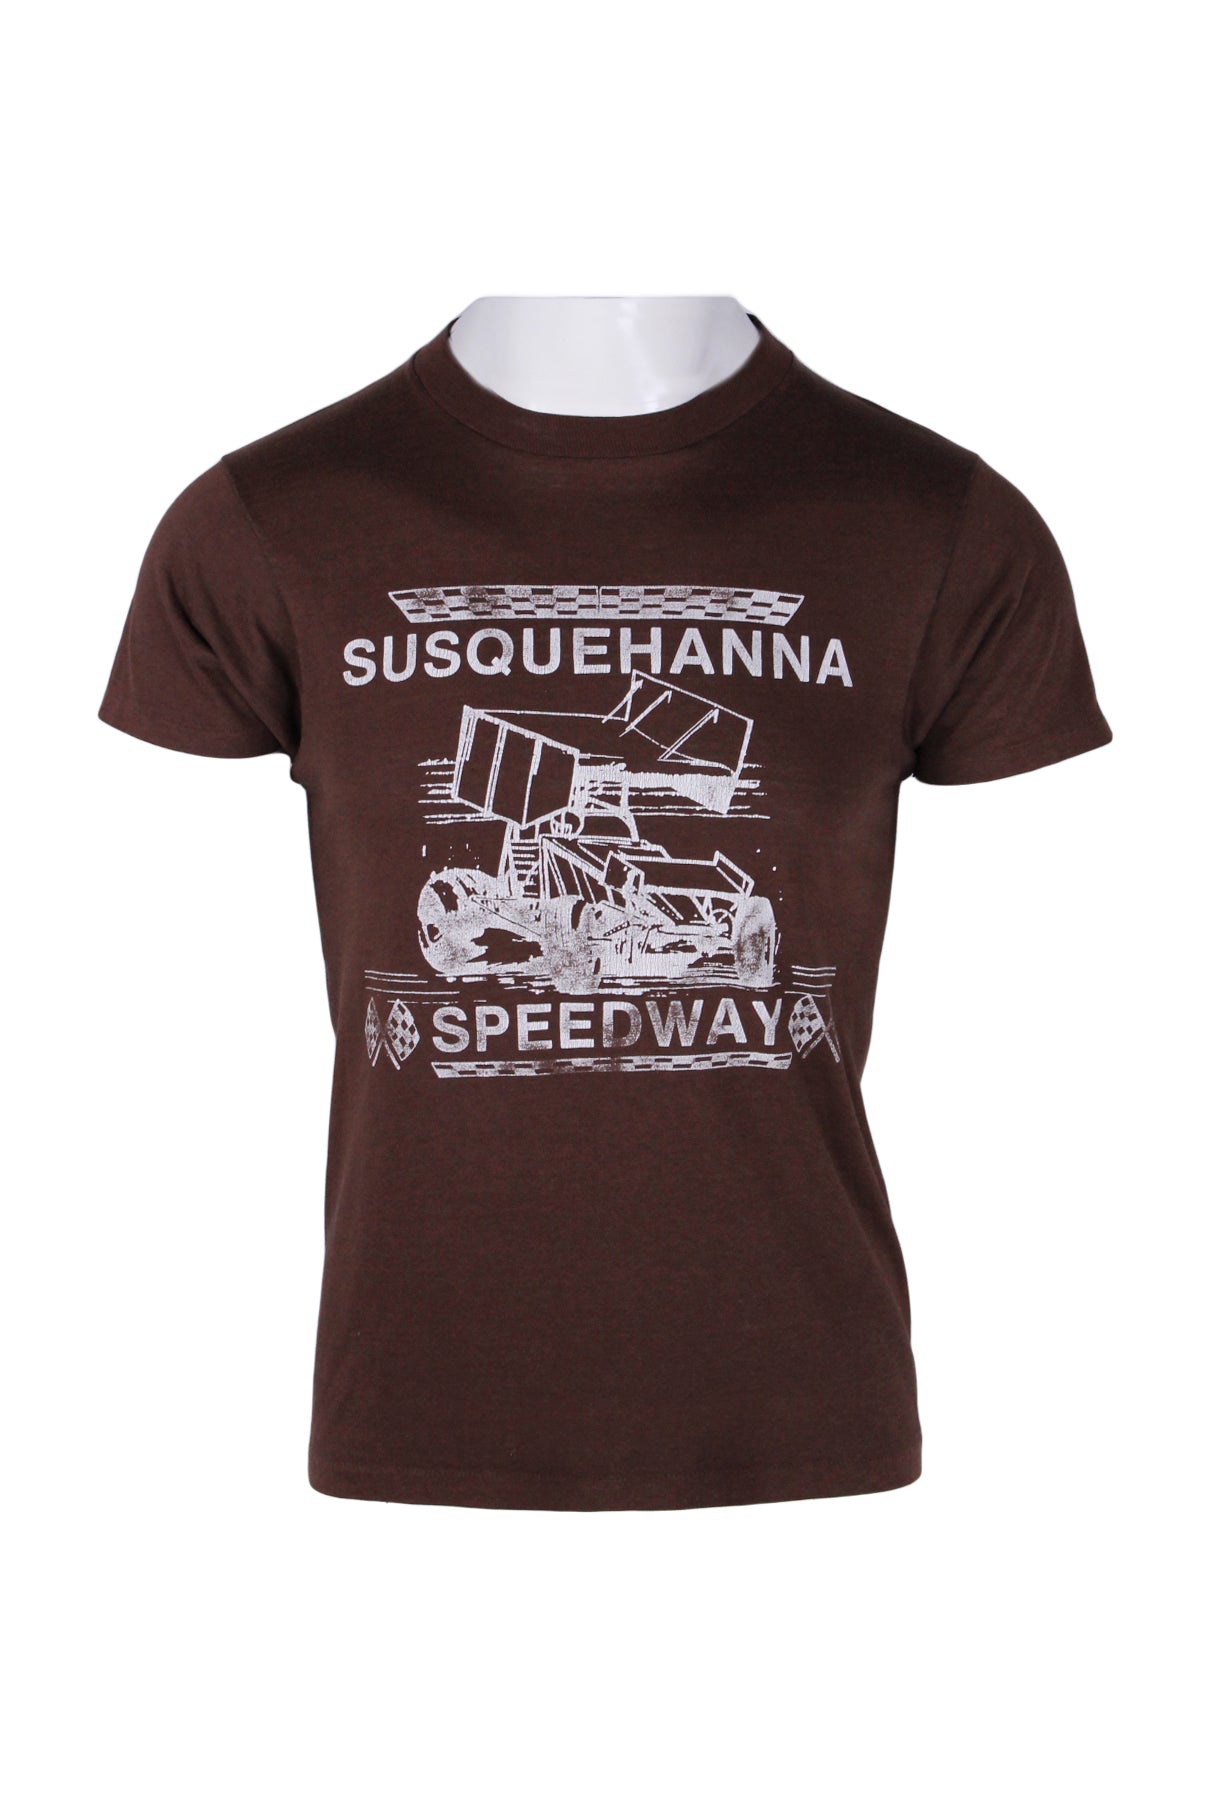 front angle of vintage hanes fifty fifty brown graphic racing t-shirt on masc mannequin torso. features white screen print of race car with text 'susquehanna speedway', single stitch hem/cuffs, and rounded ribbed collar. 